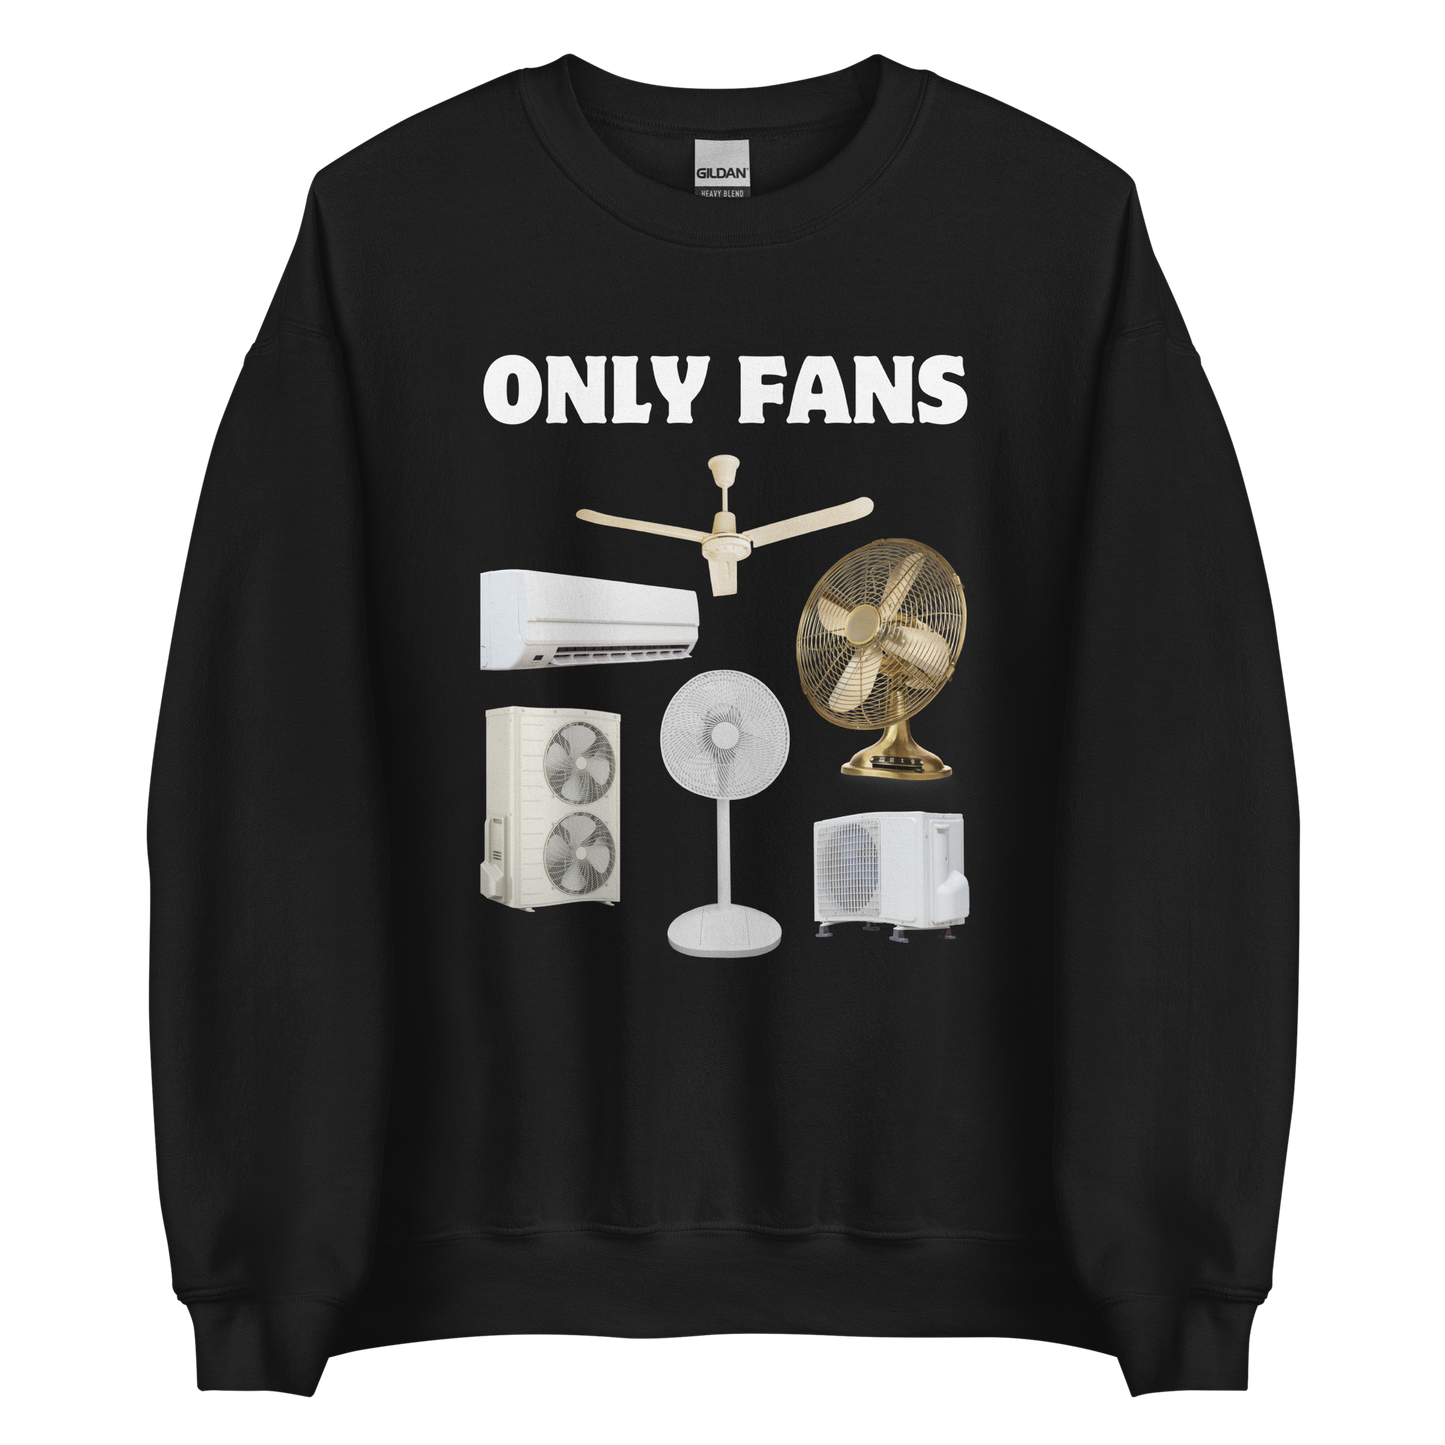 Black Only Fans Sweatshirt featuring a fun Fans graphic on the chest - Best Graphic Sweatshirts - Boozy Fox